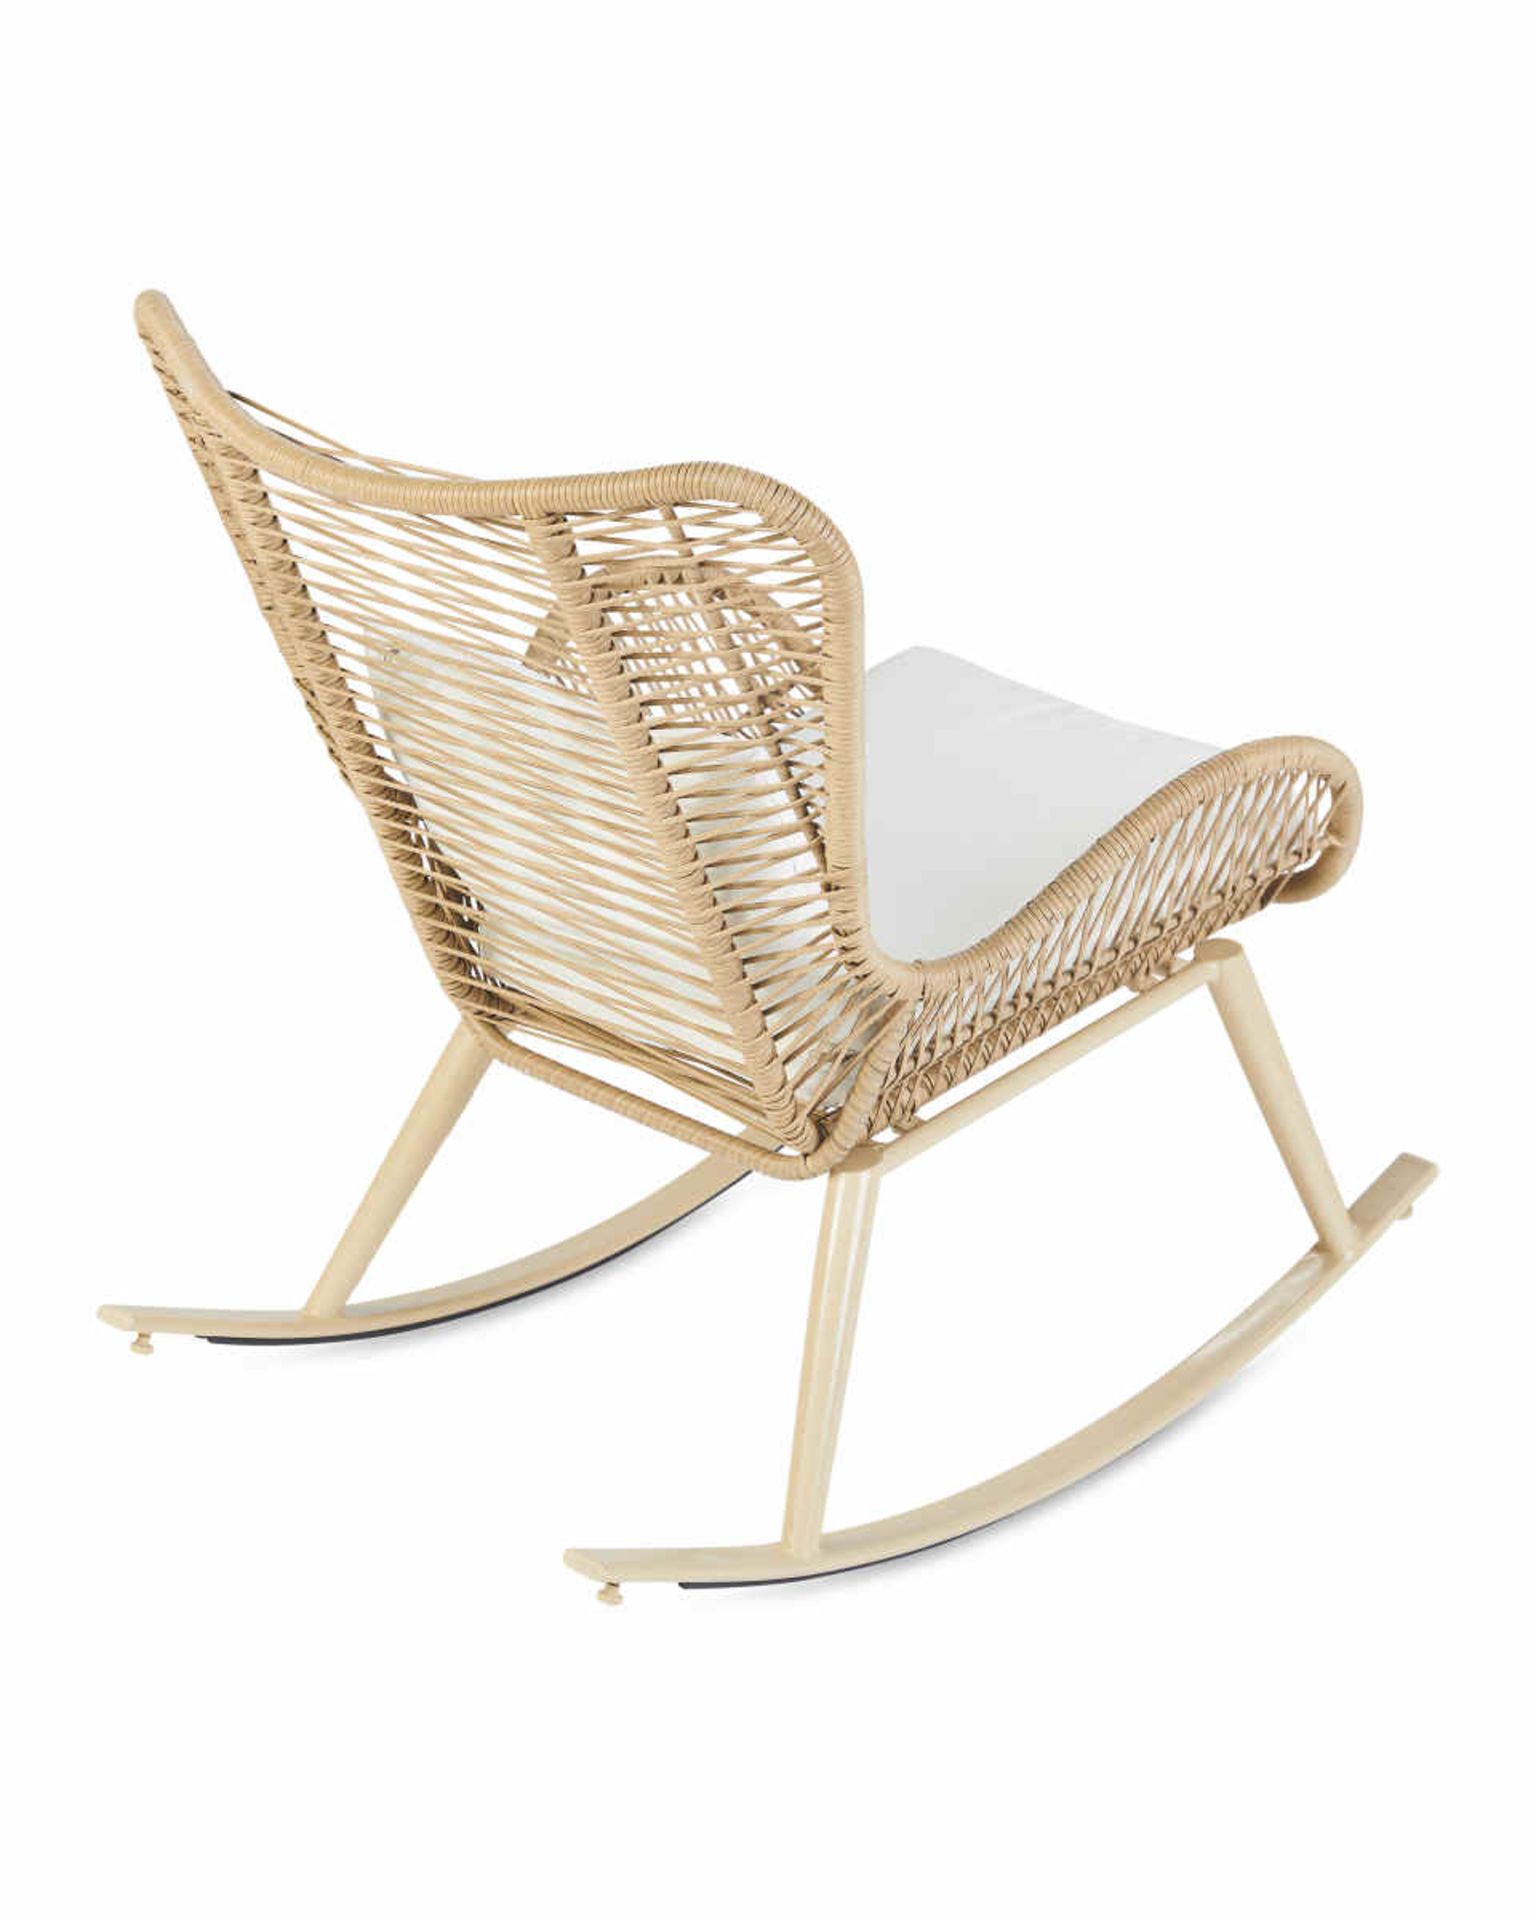 Luxury Rope Effect Rocking Chair. This Luxury Rope Effect Rocking Chair is this seasons must have - Image 2 of 2